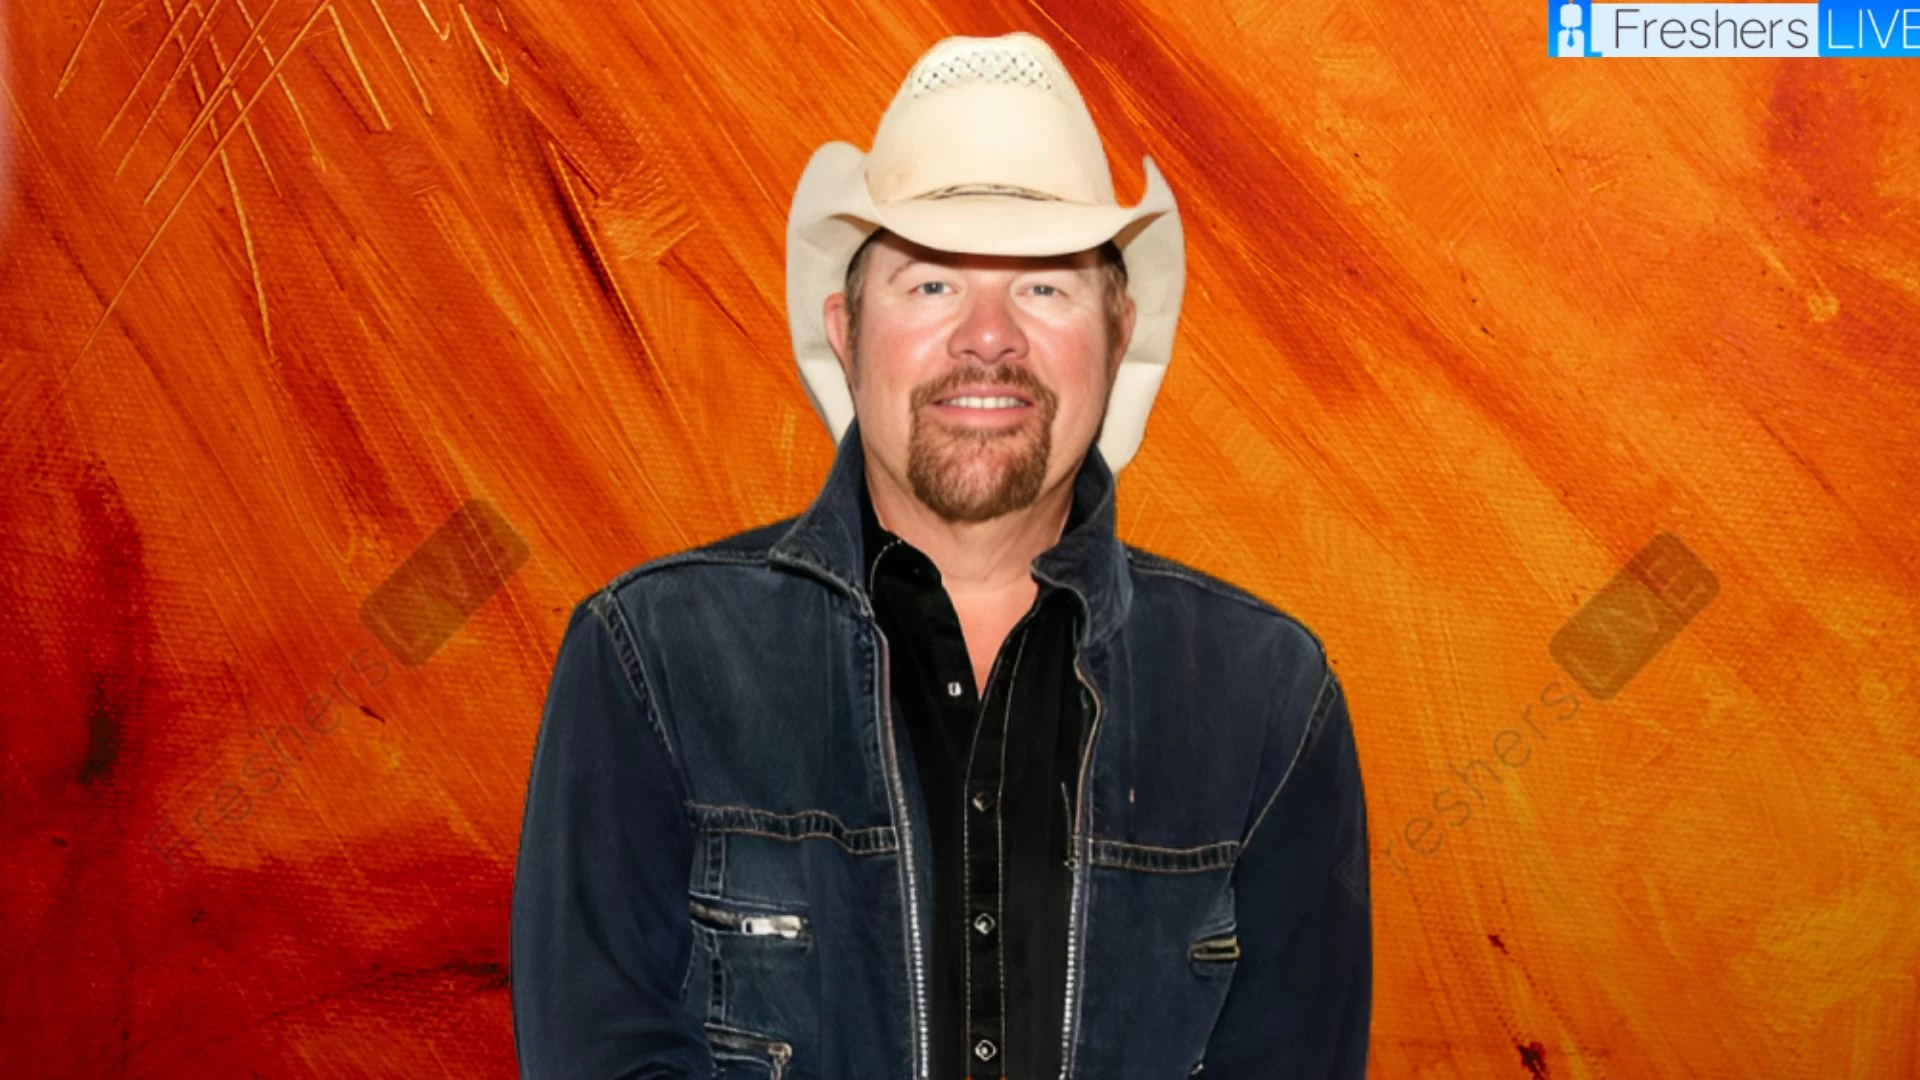 Toby Keith Ethnicity, What is Toby Keith's Ethnicity?